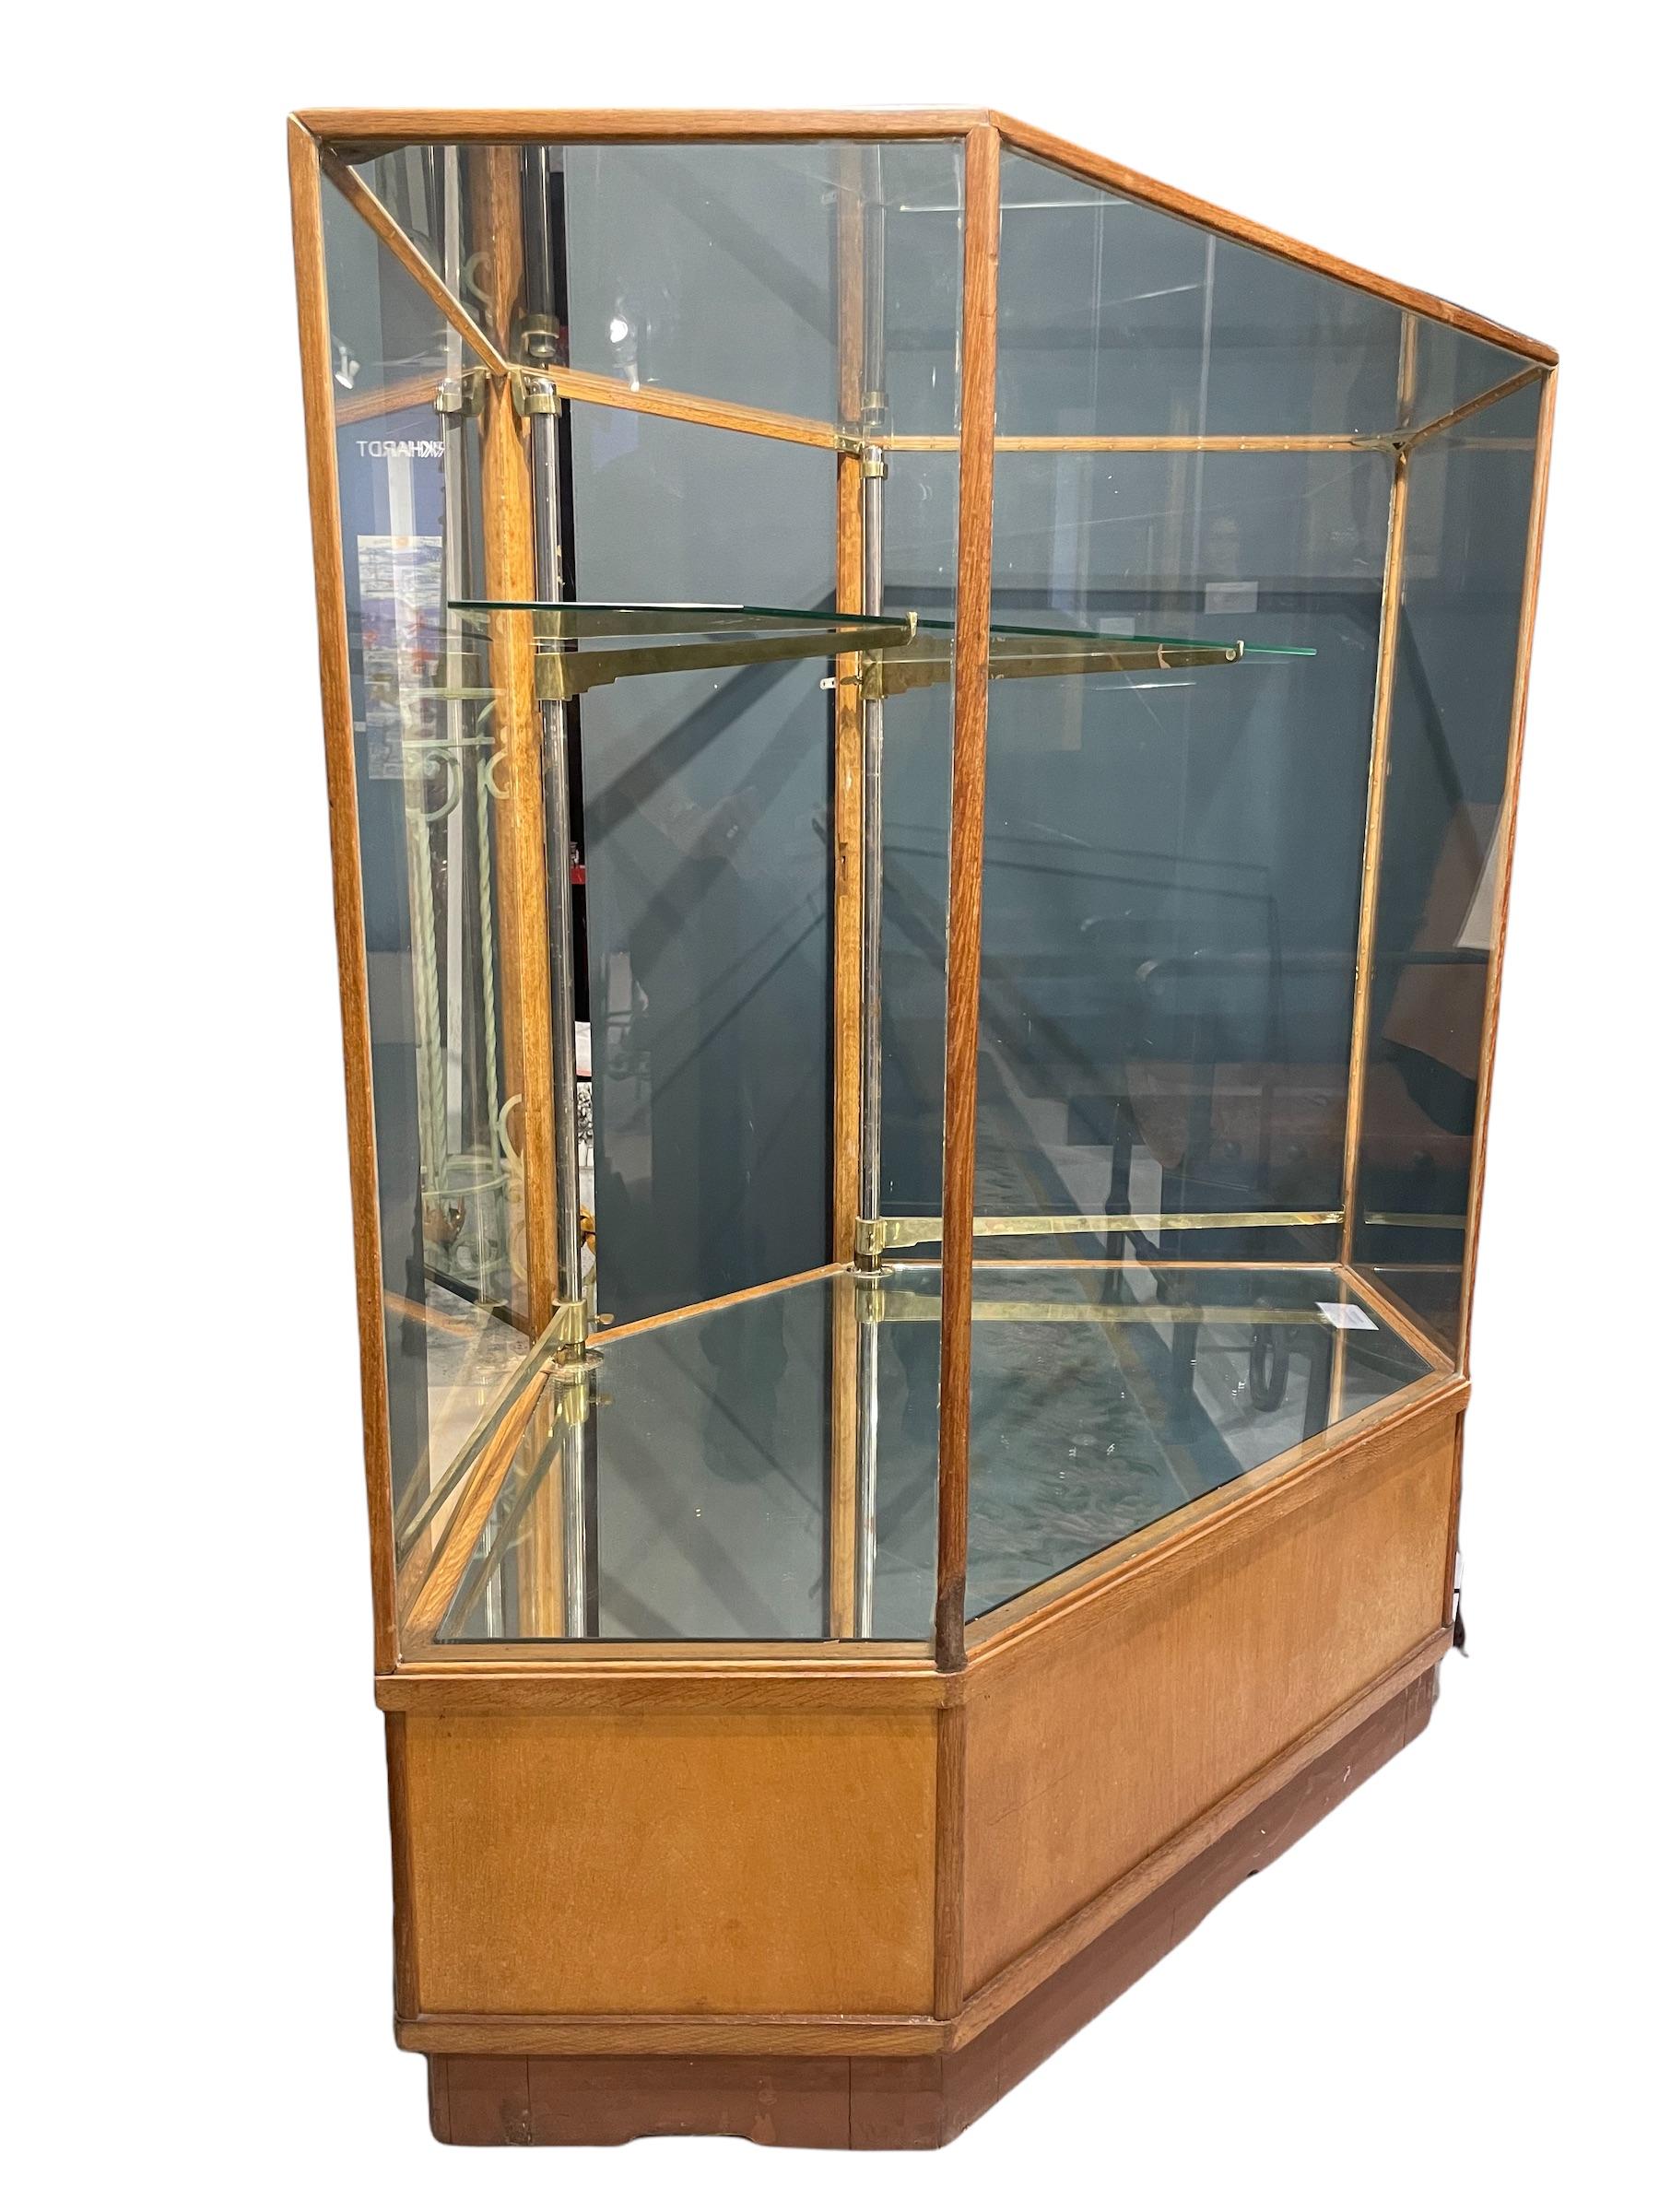 Hexagonal corner cabinet from a Parisian art gallery, this elegant vitrine is glazed on six sides on a wooden base. A practical and easy system allows adjusting the height of the two glass shelves with an intelligent brass mechanism—mirrored glass